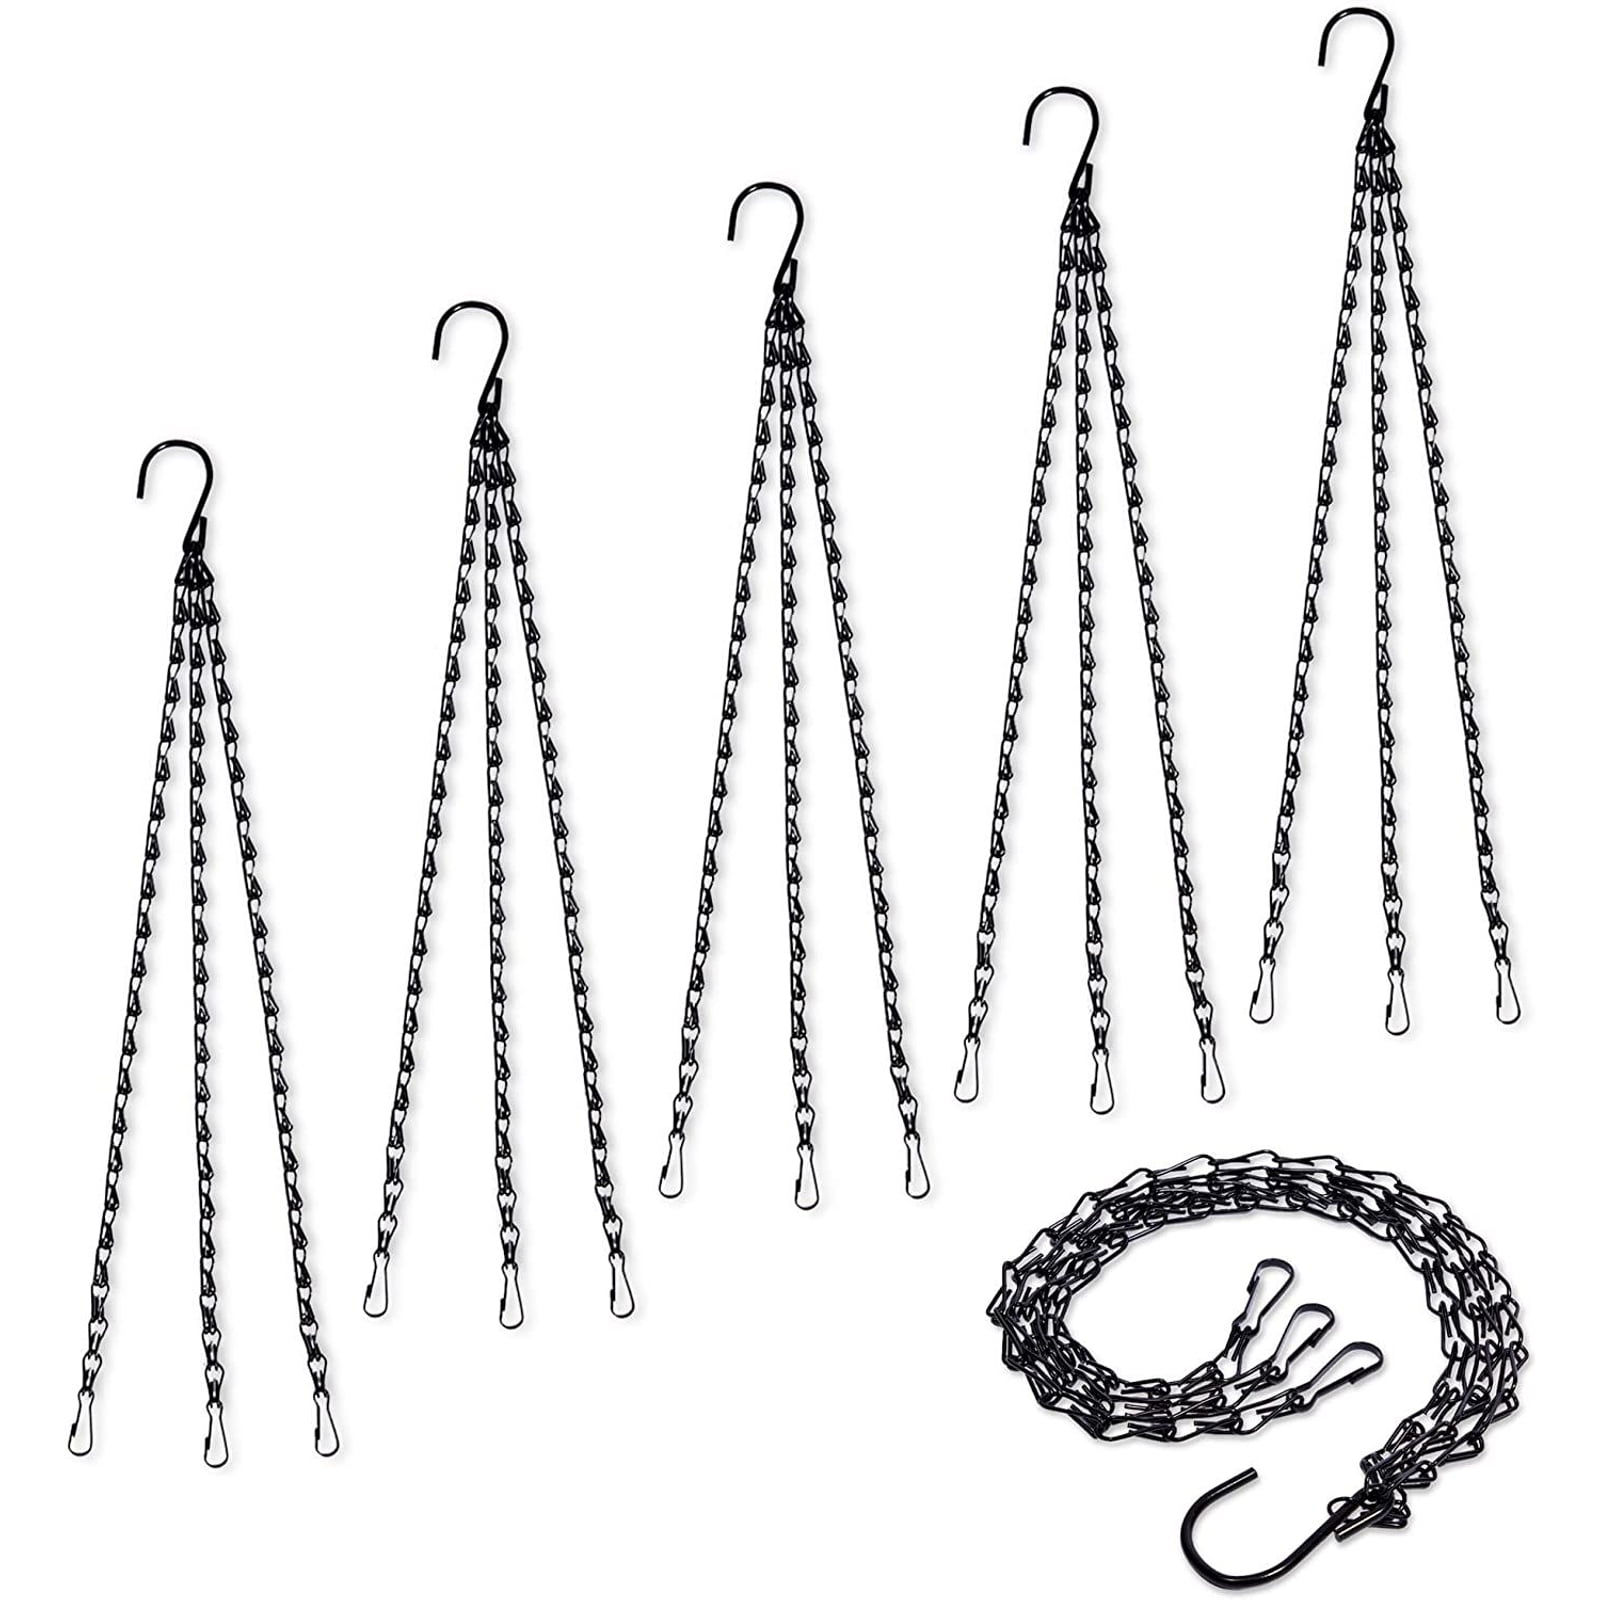 6 X 4 Leg Garden Hanging Basket Spare Metal Chains Easy Fit Replacement Hanger 